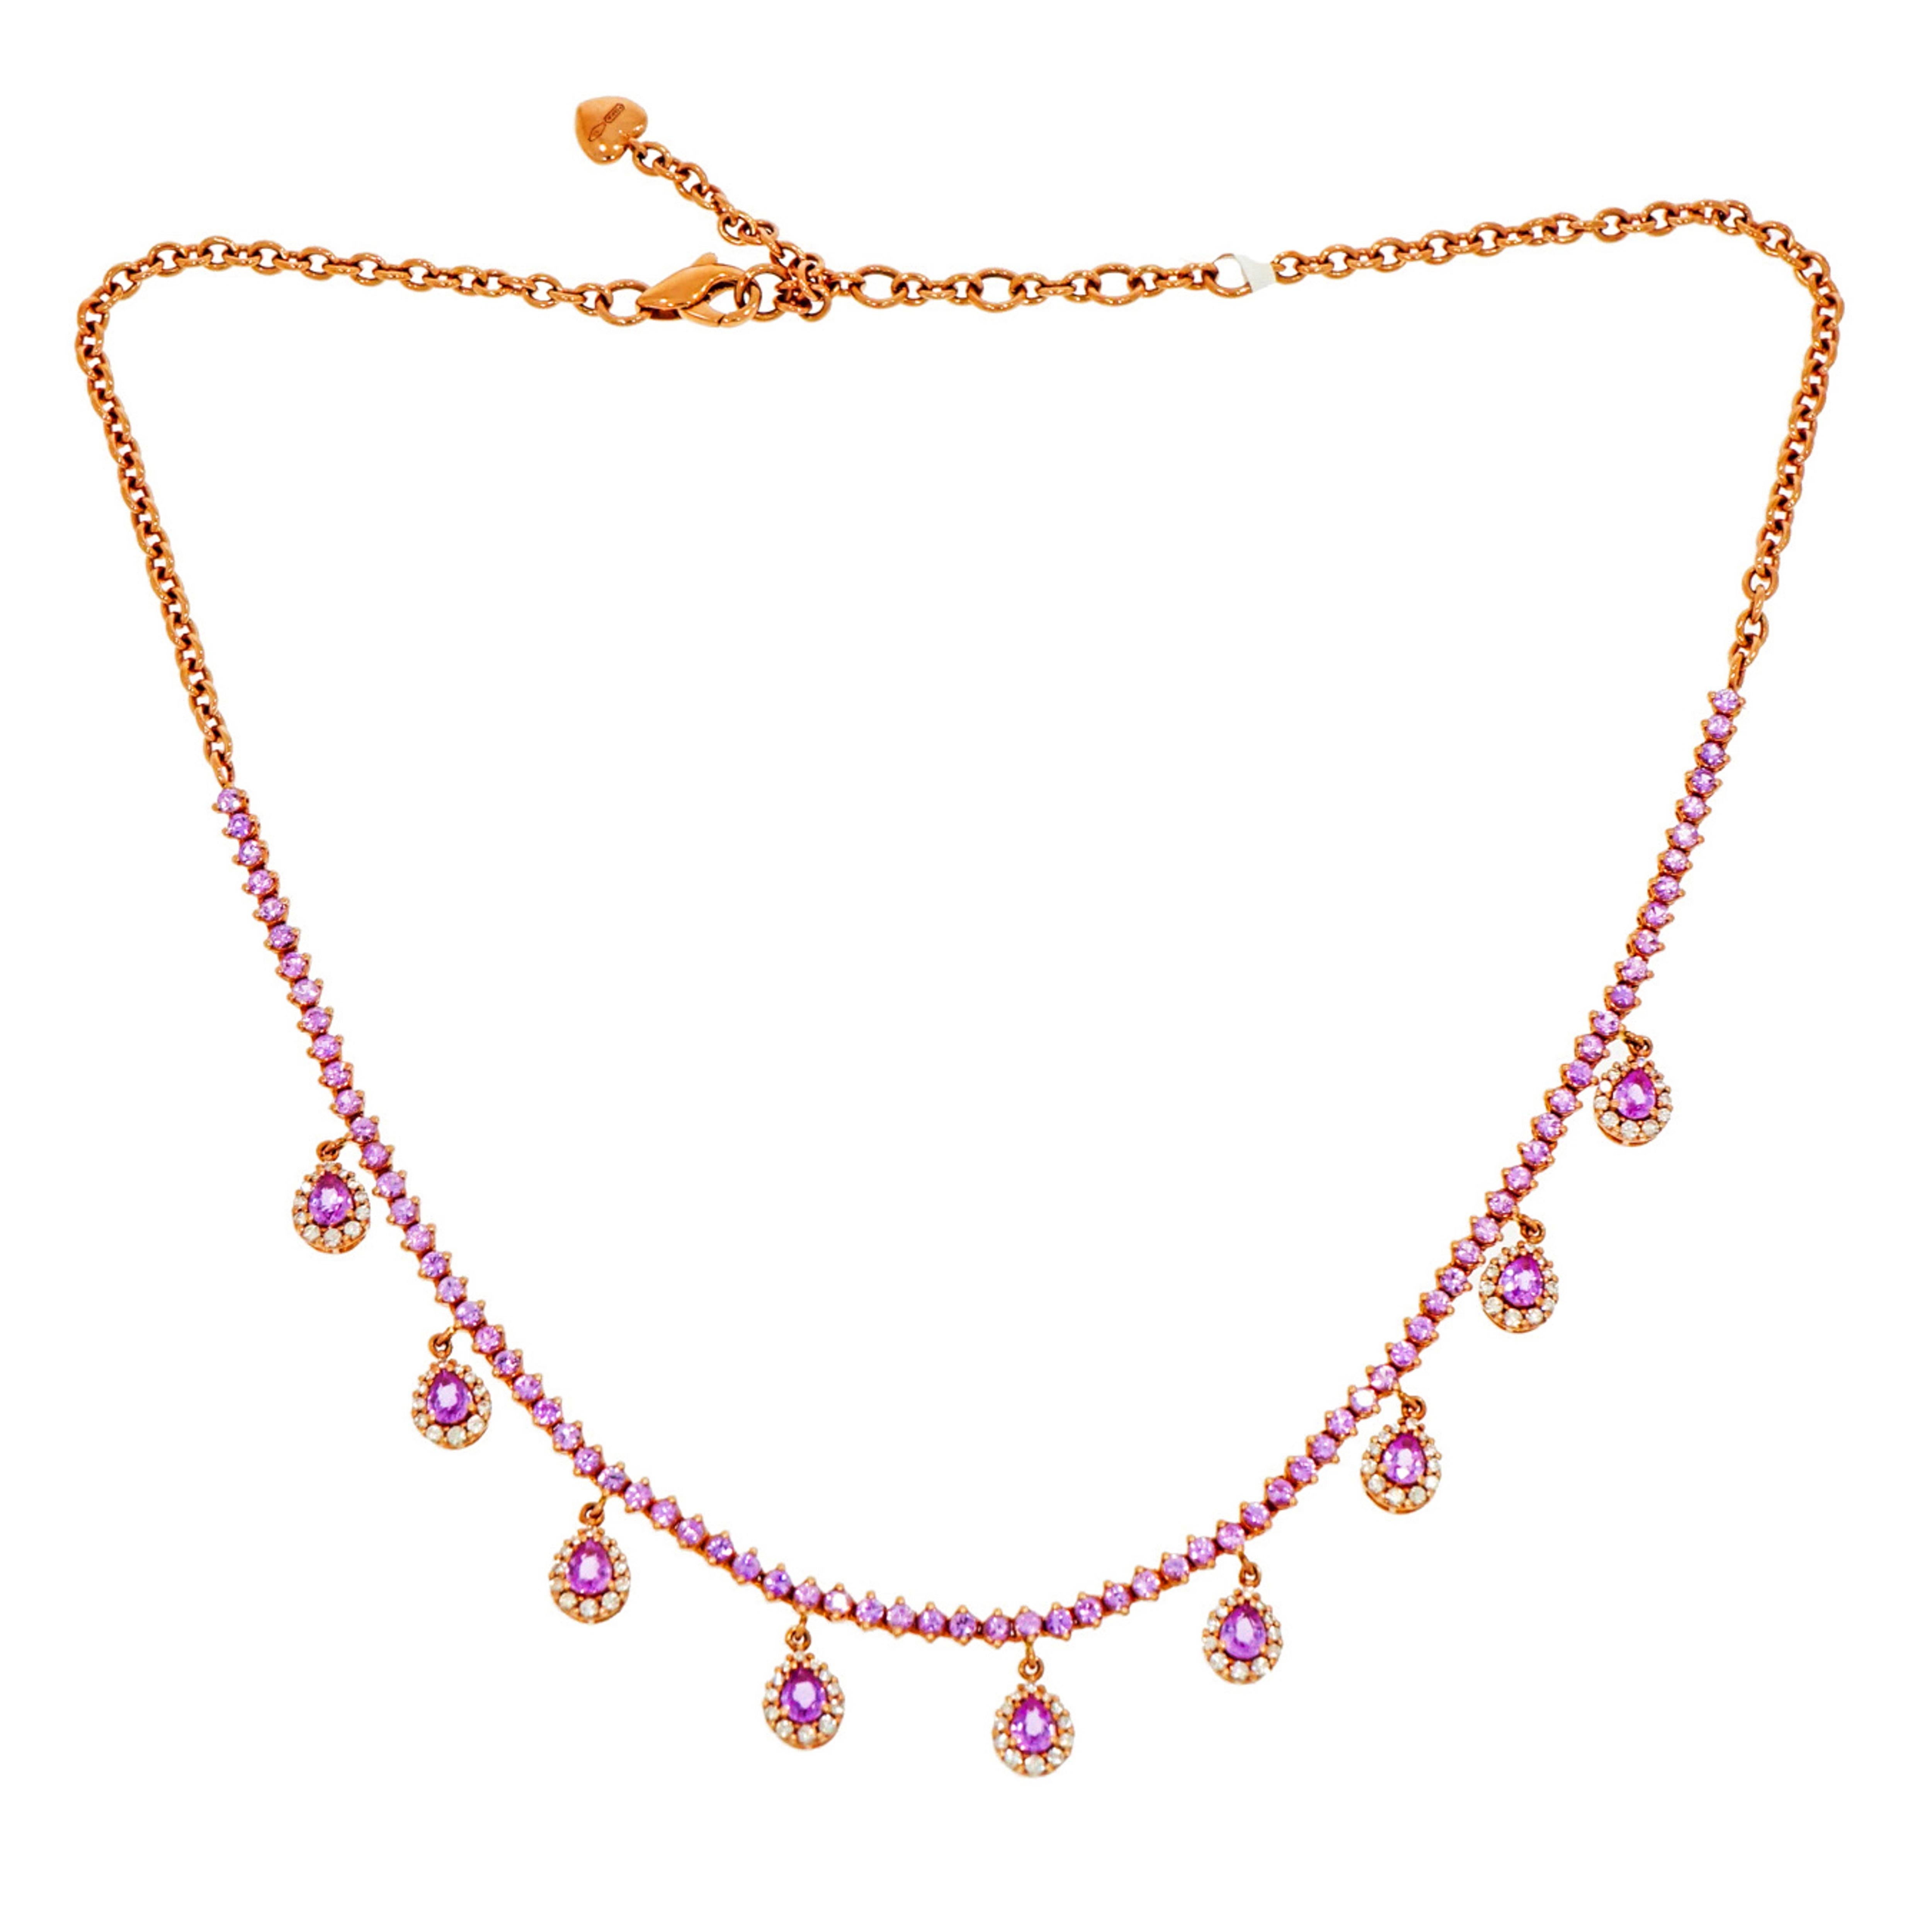 This enchanting Pink Sapphire and Diamond Necklace, is designed and perfectly crafted by Leo Pizzo in 18k Rose Gold.
Set with a line of round Pink Sapphires and accented by Pear shaped Pink Sapphire Drops surrounded by  a halo of White Diamonds.